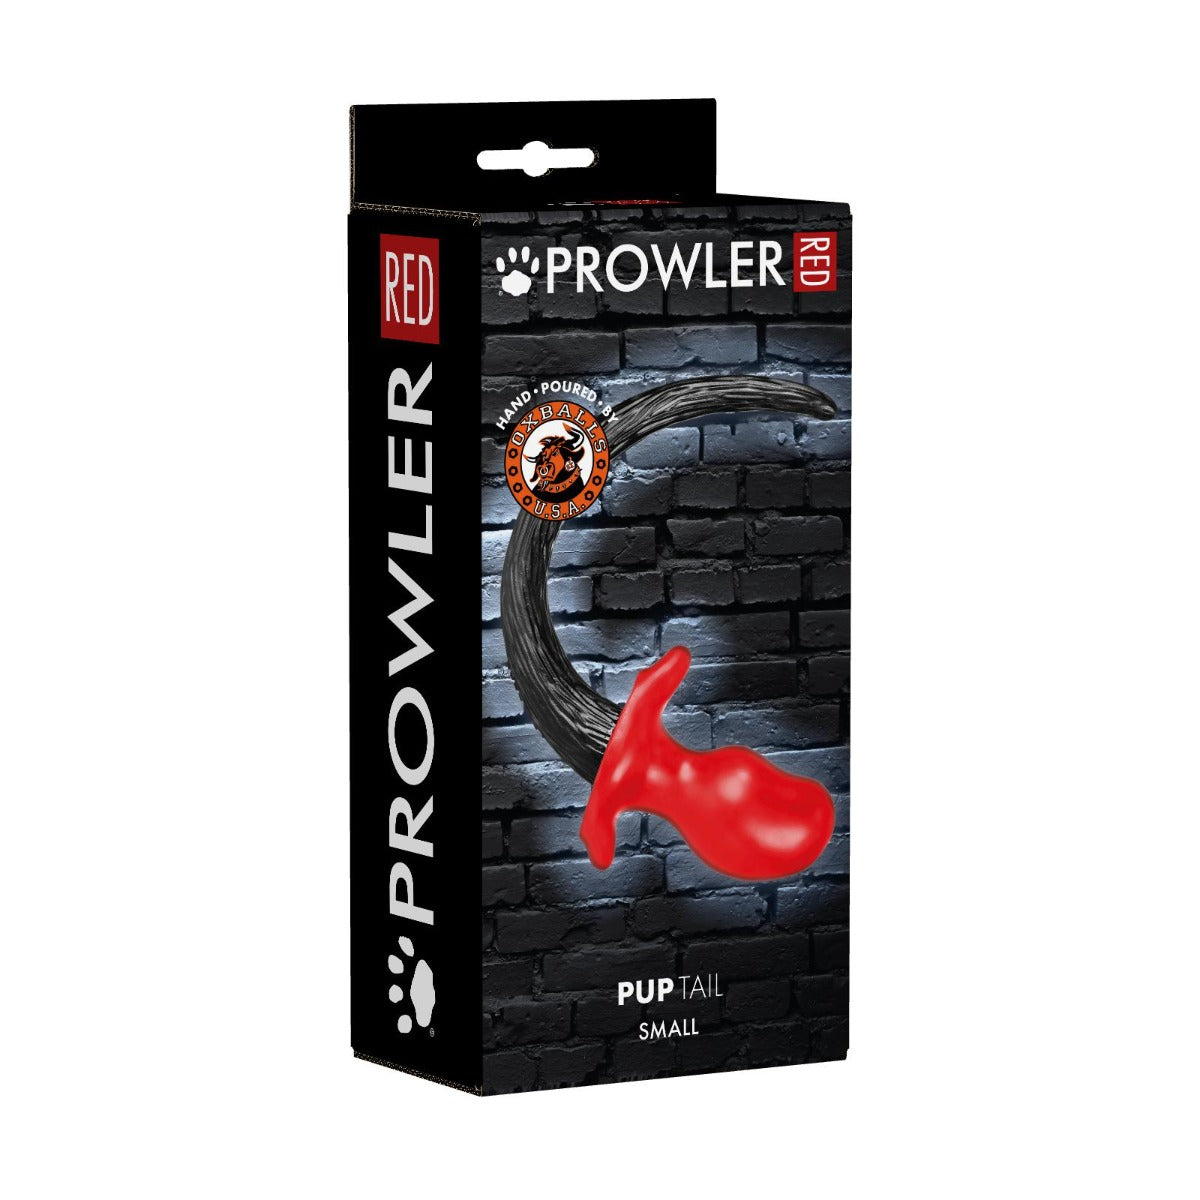 Butt Plugs Prowler RED PUPTAIL by Oxballs Small   